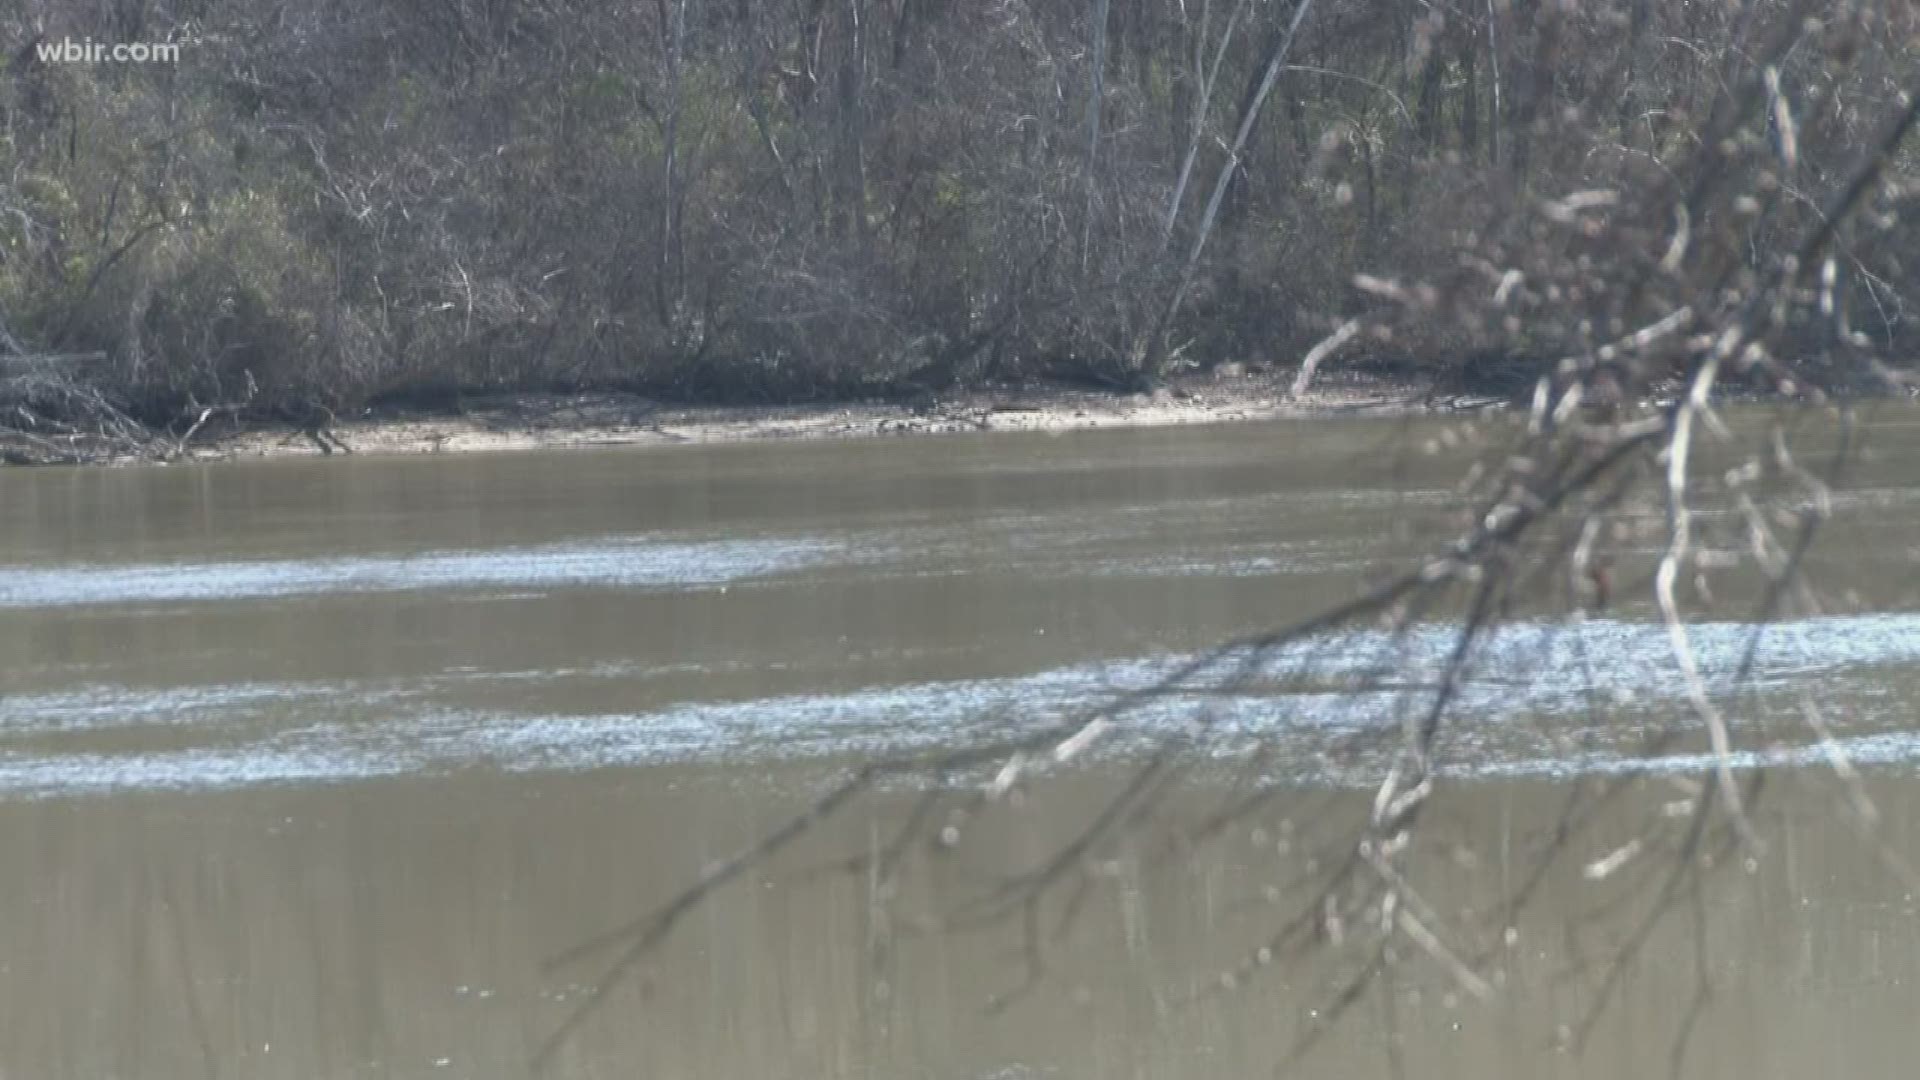 Some people toss their trees into lakes as fish habitats... but TVA said if not done properly, that can introduce hazards in the water.